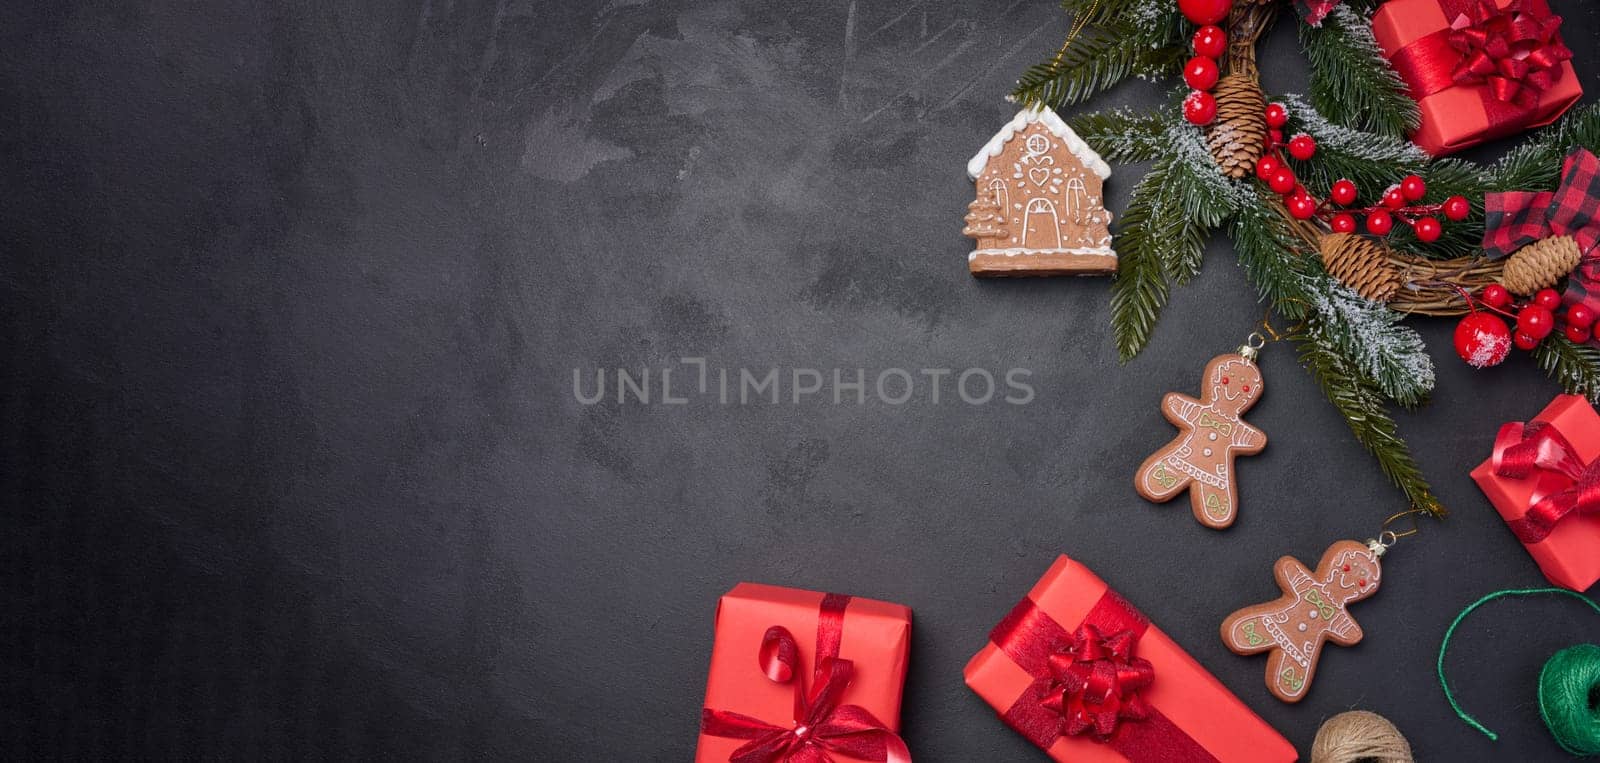 Christmas decor, gift red boxes on a black background, top view. Place for inscription